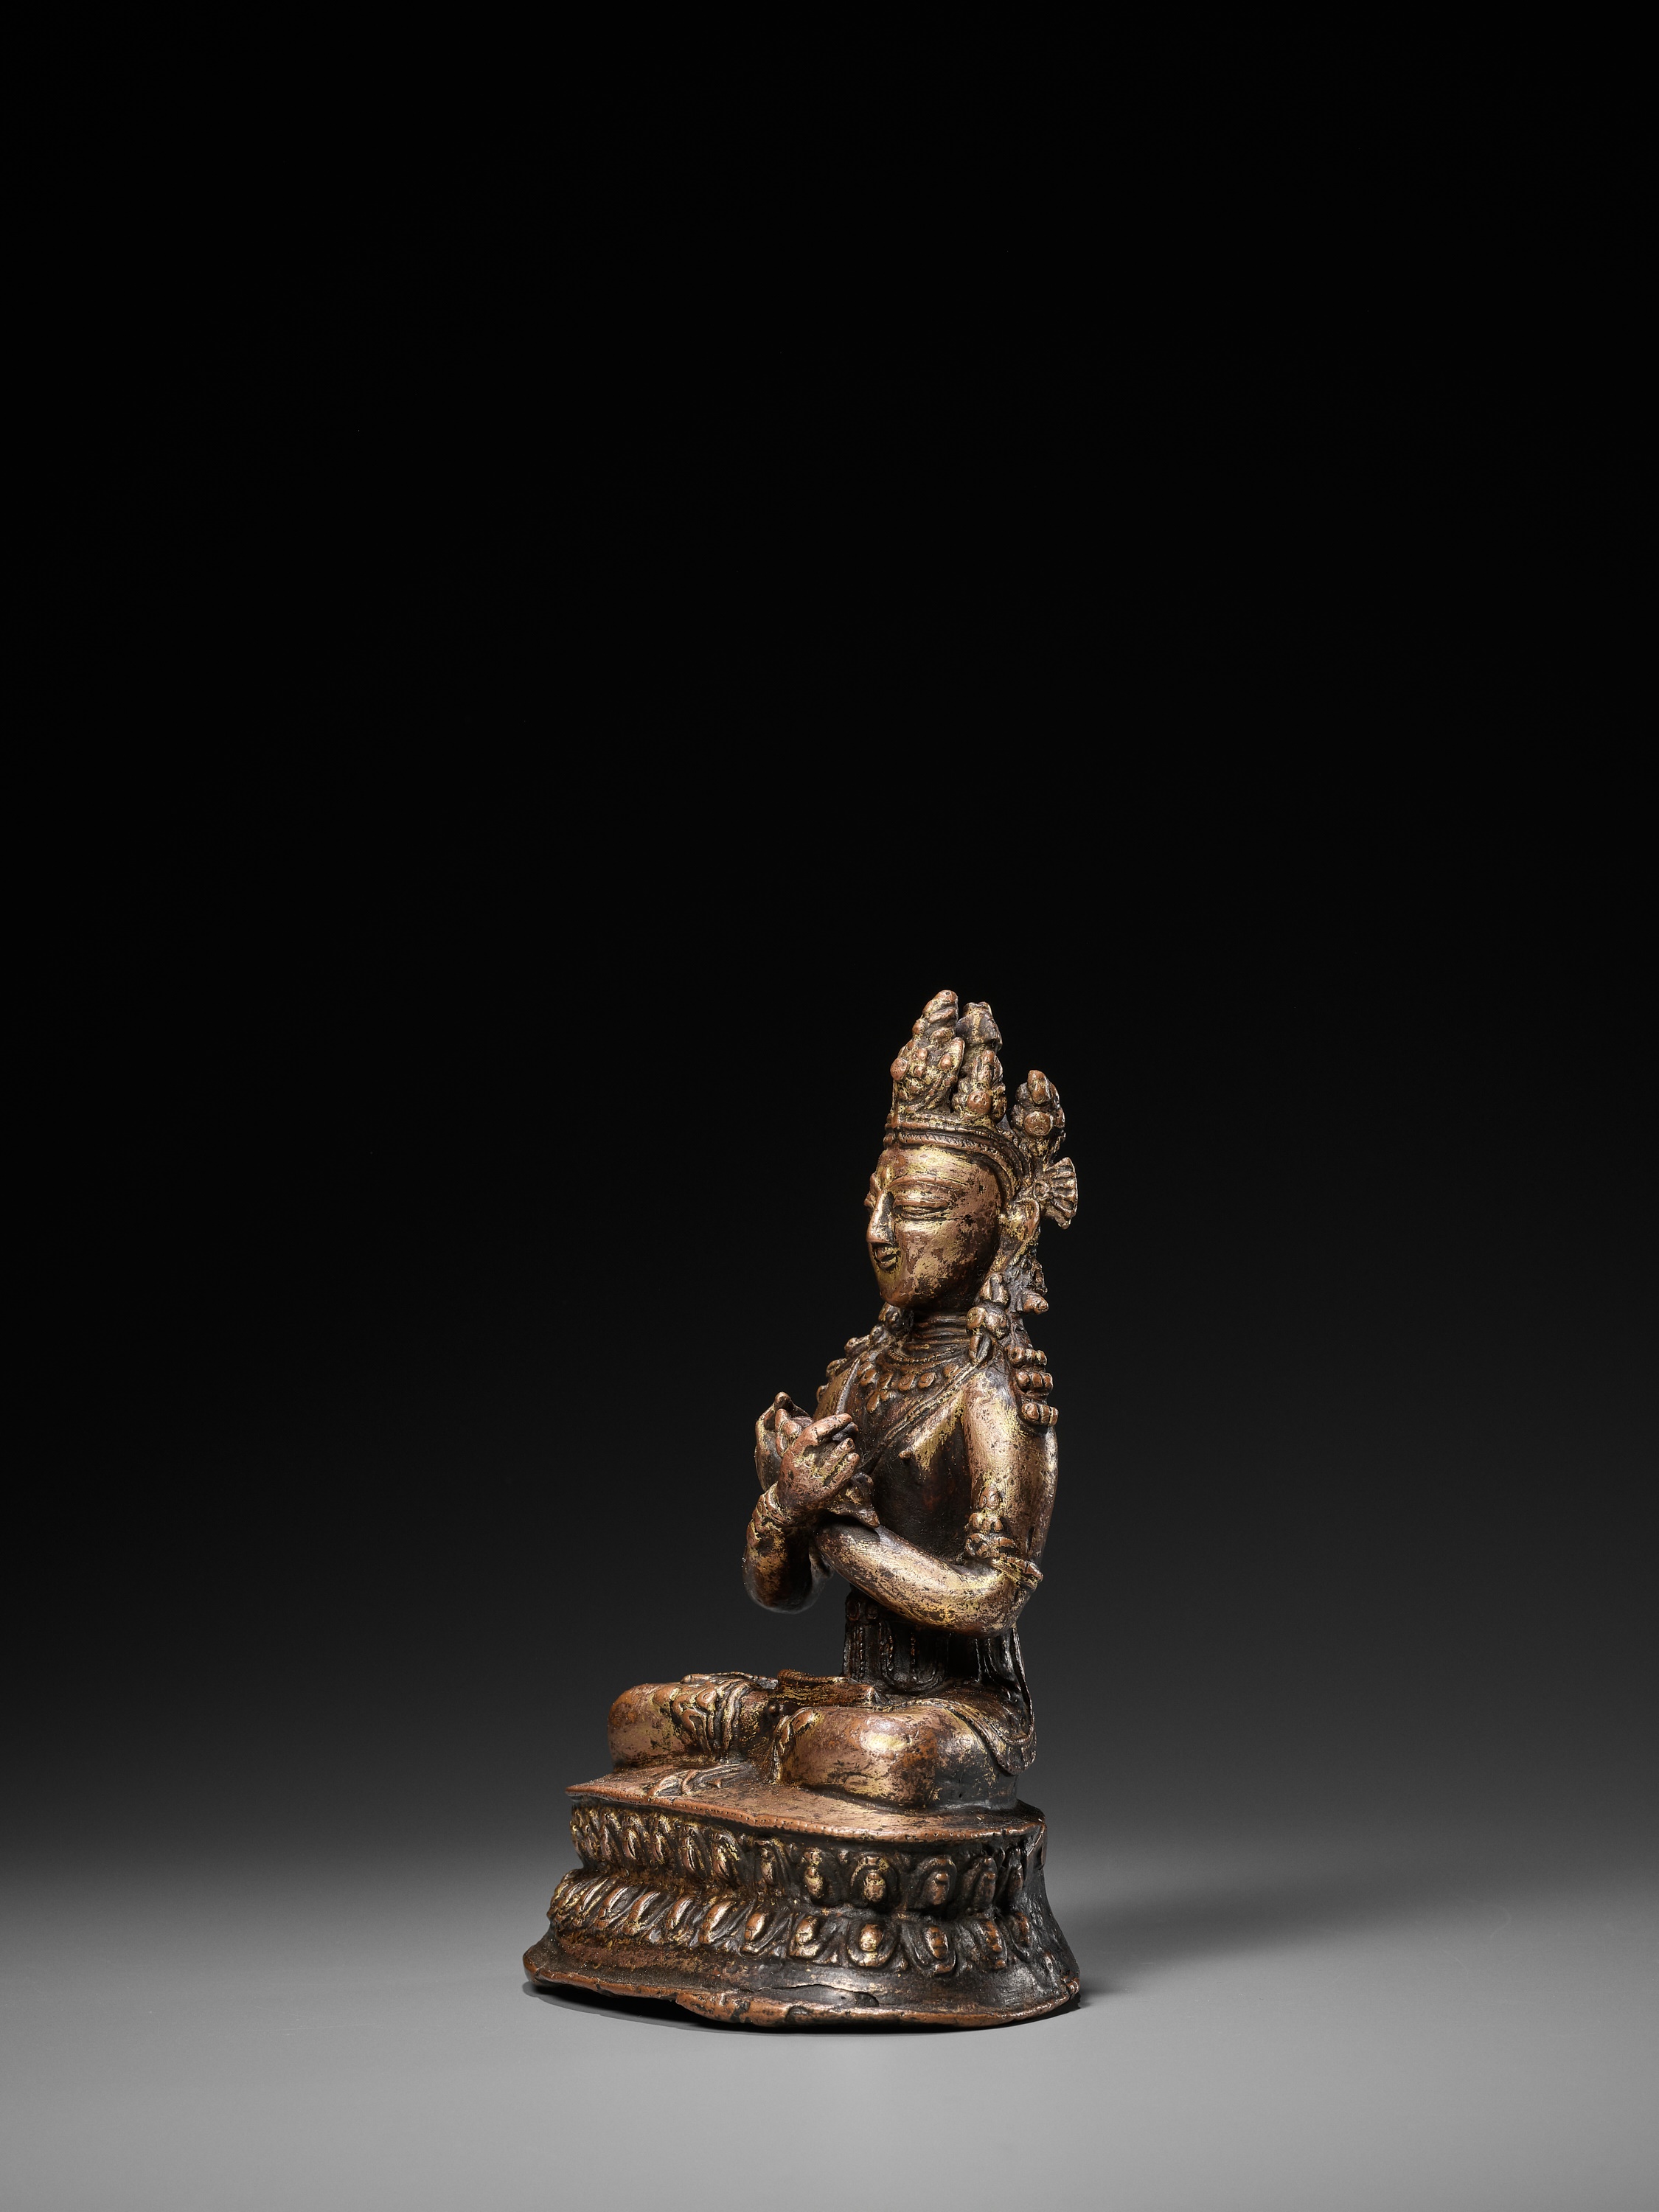 A GILT COPPER-ALLOY FIGURE OF VAJRADHARA, 15th-16TH CENTURY OR EARLIER - Image 7 of 13